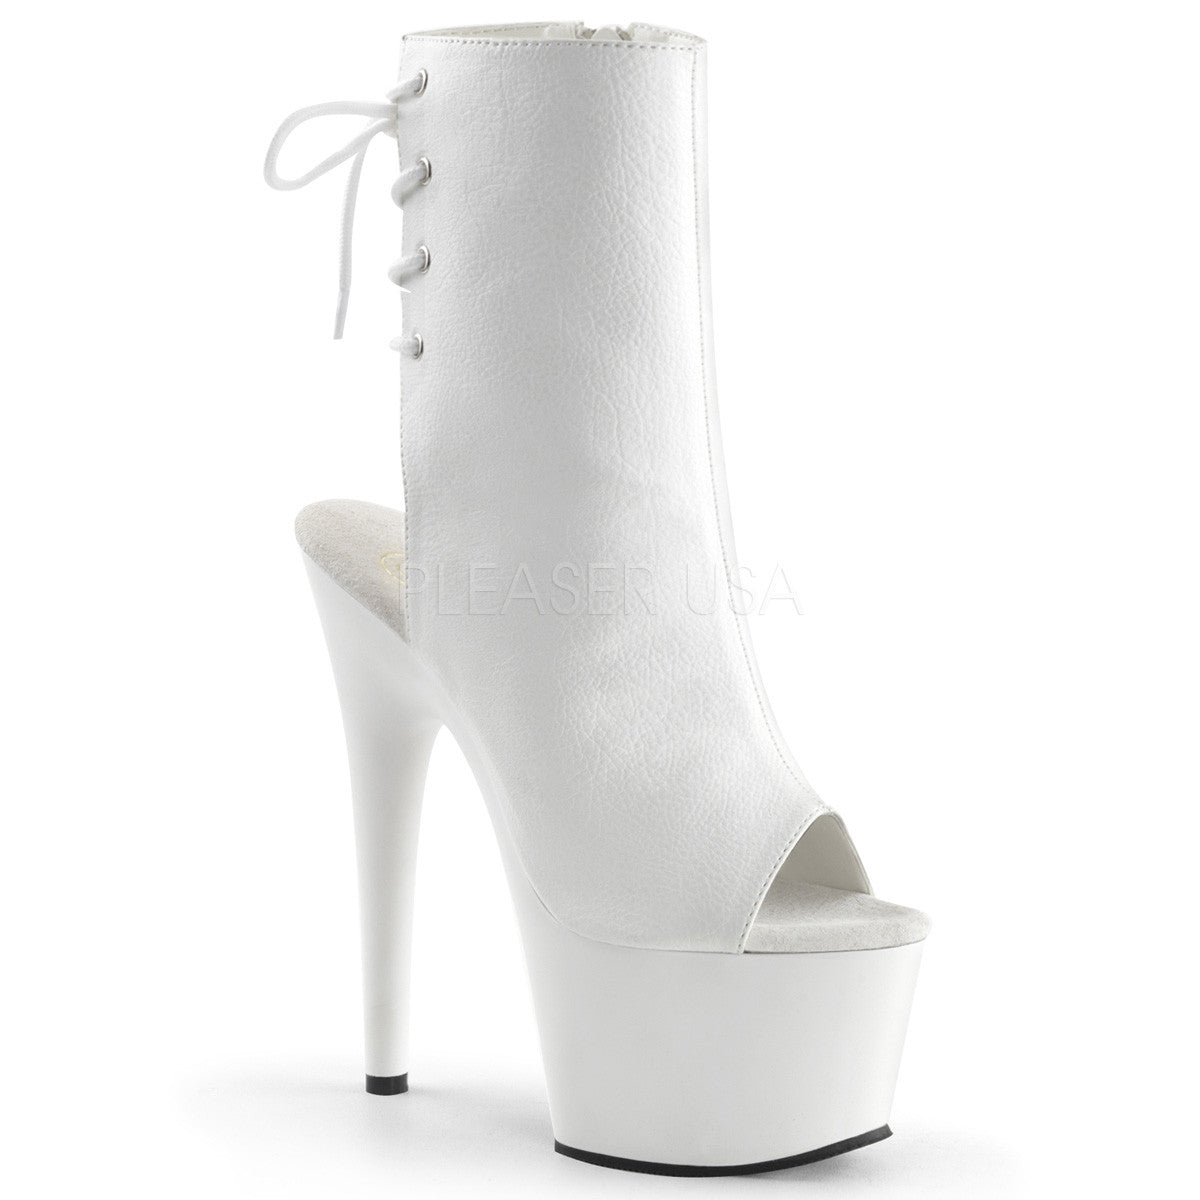 Pleaser ADORE-1018 White Pu Ankle Boots - Shoecup.com - 1